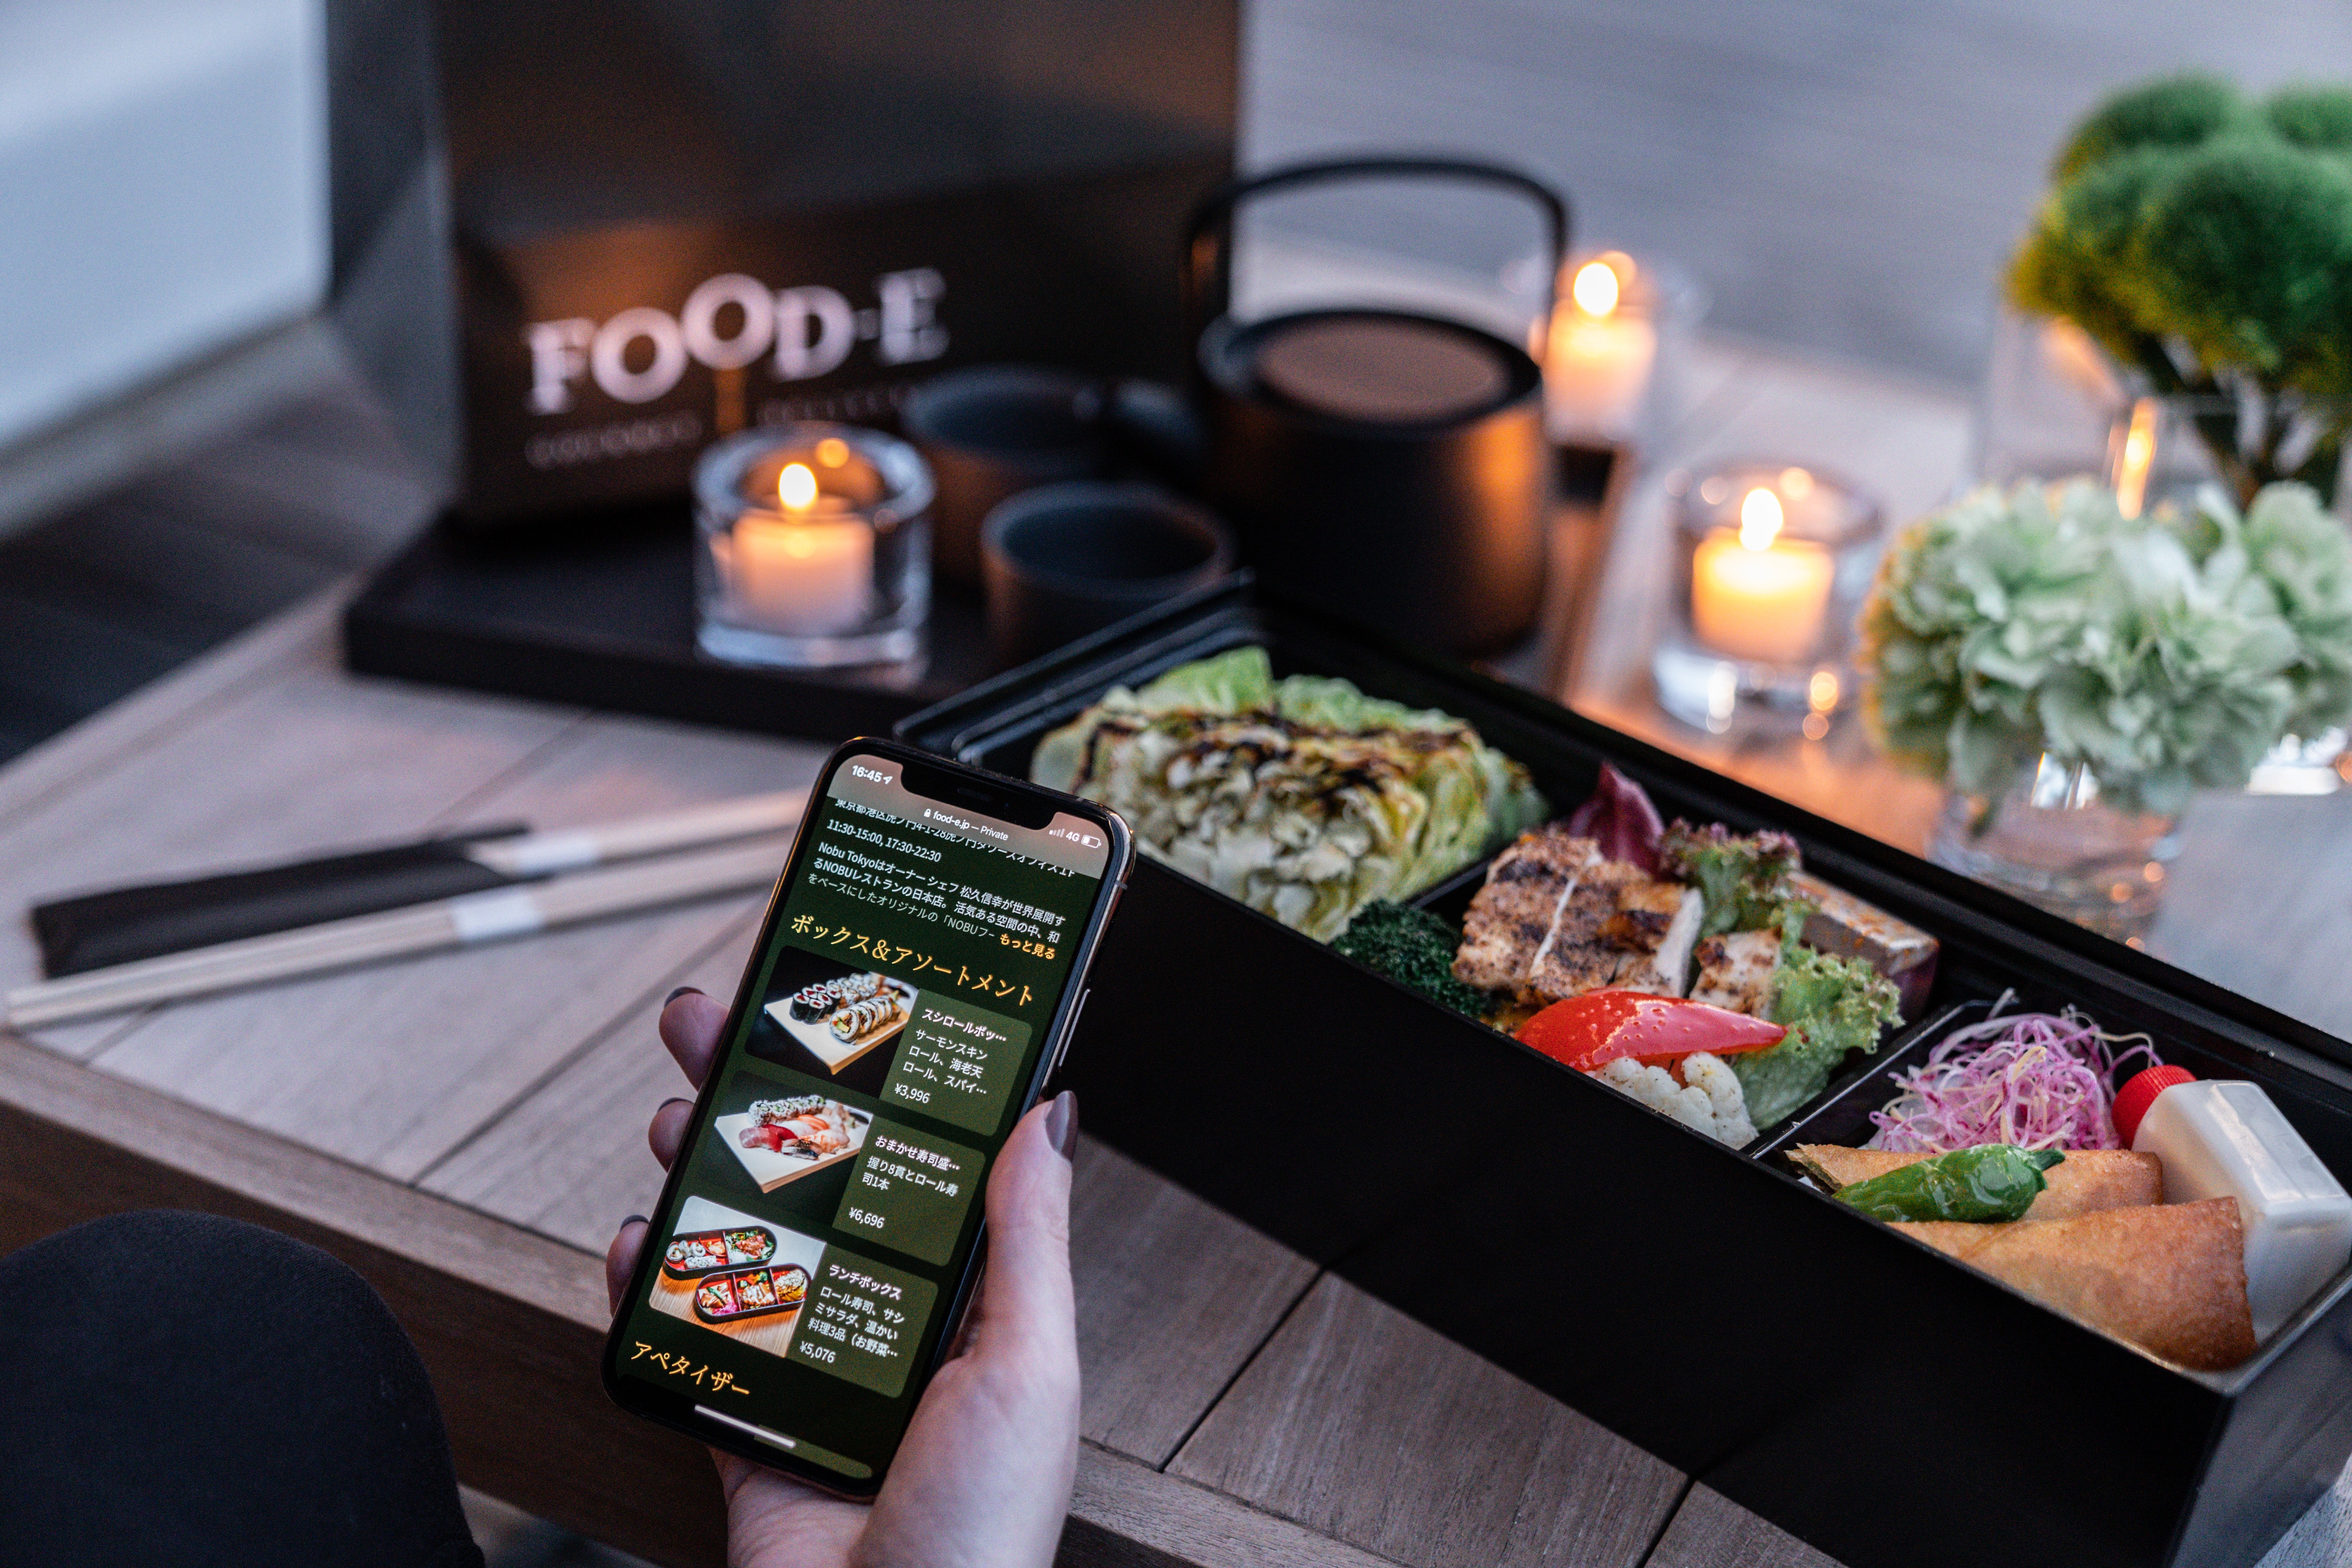       "Nobu at Home"   DELIVERY by Food-E   Enjoy our extensive take-out menu  delivered to your home via Food-E!    Food-E     &nbsp;    &nbsp;    &nbsp;  